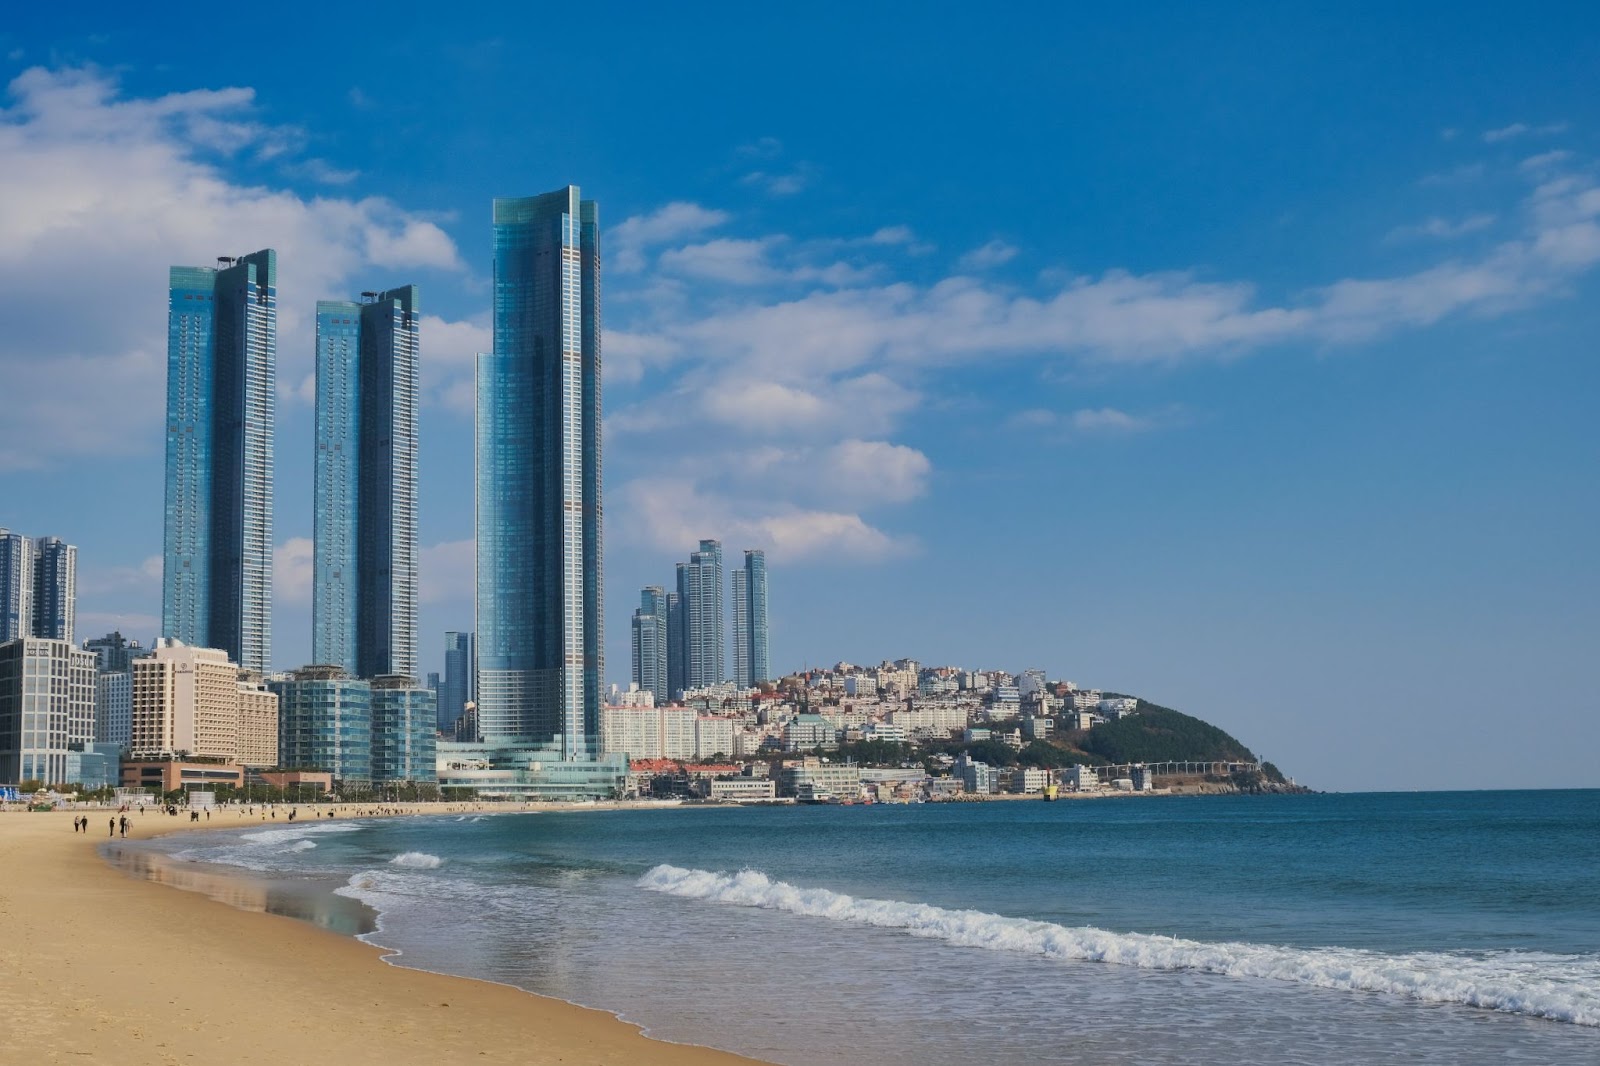 Hayundae beach in Busan, a city that is also getting a new city slogan